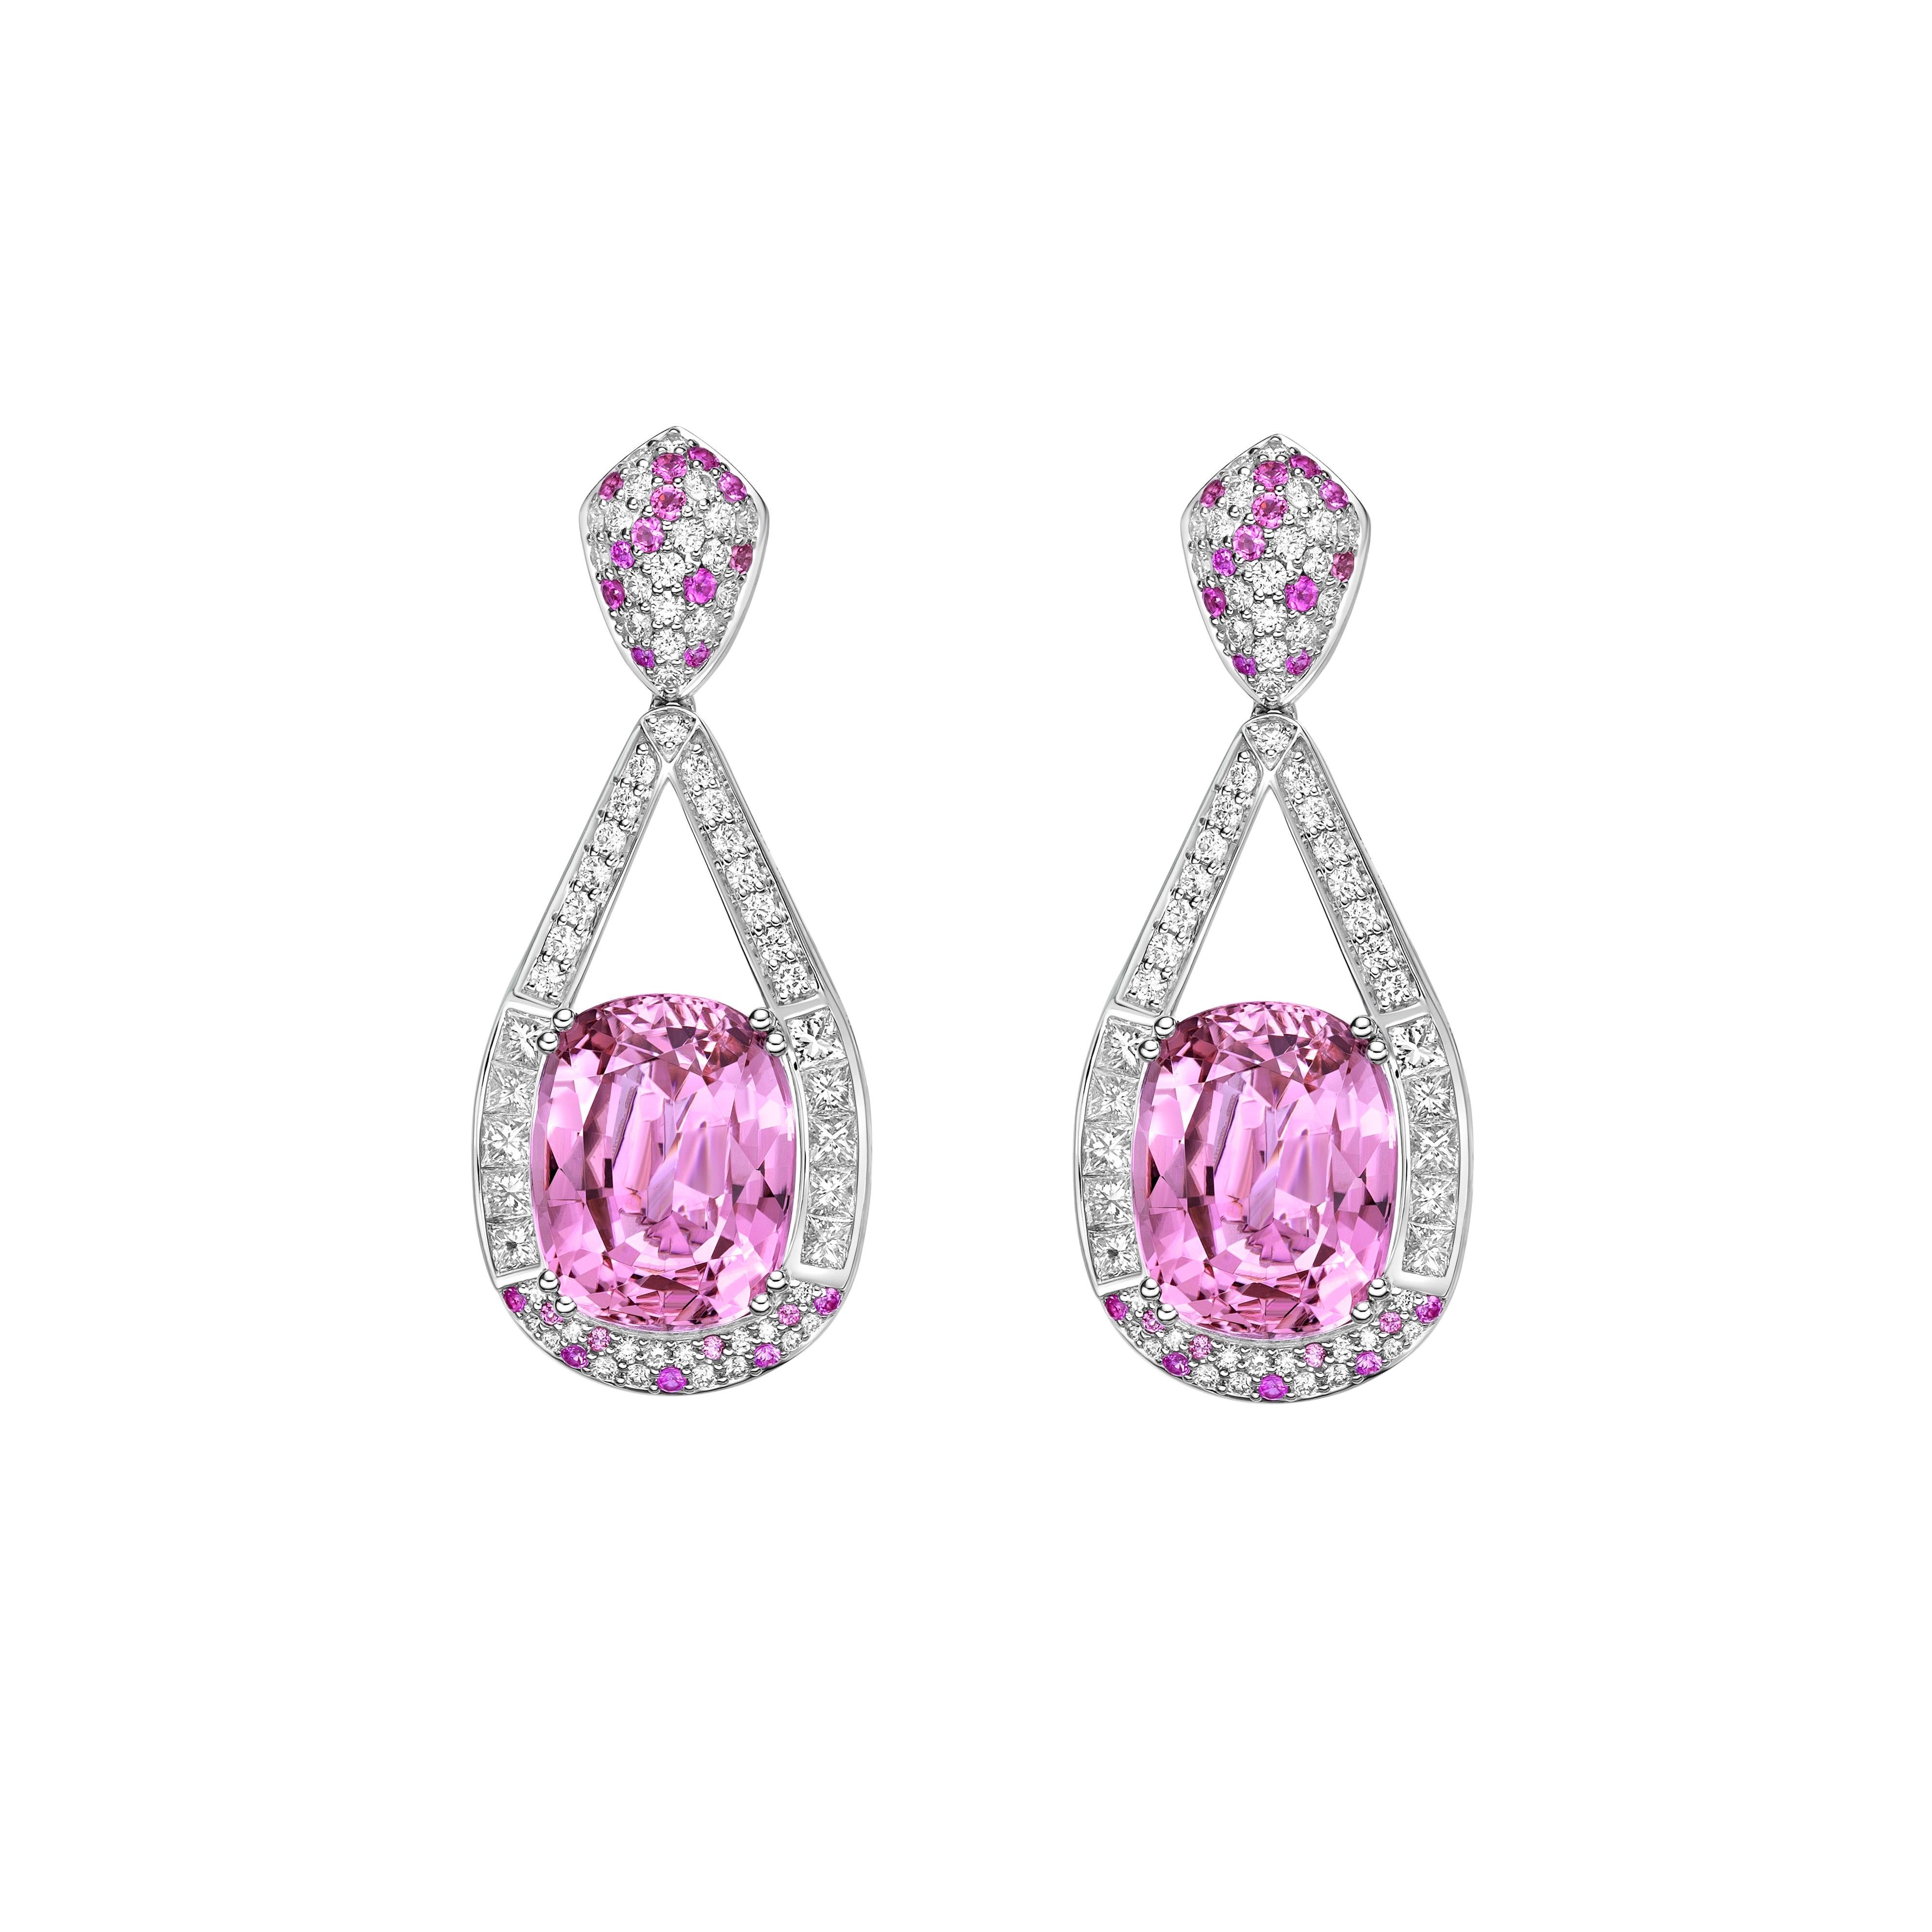 Contemporary 17.72 Carat Pink Tourmaline Drop Earrings in 18Karat White Gold with Diamond. For Sale